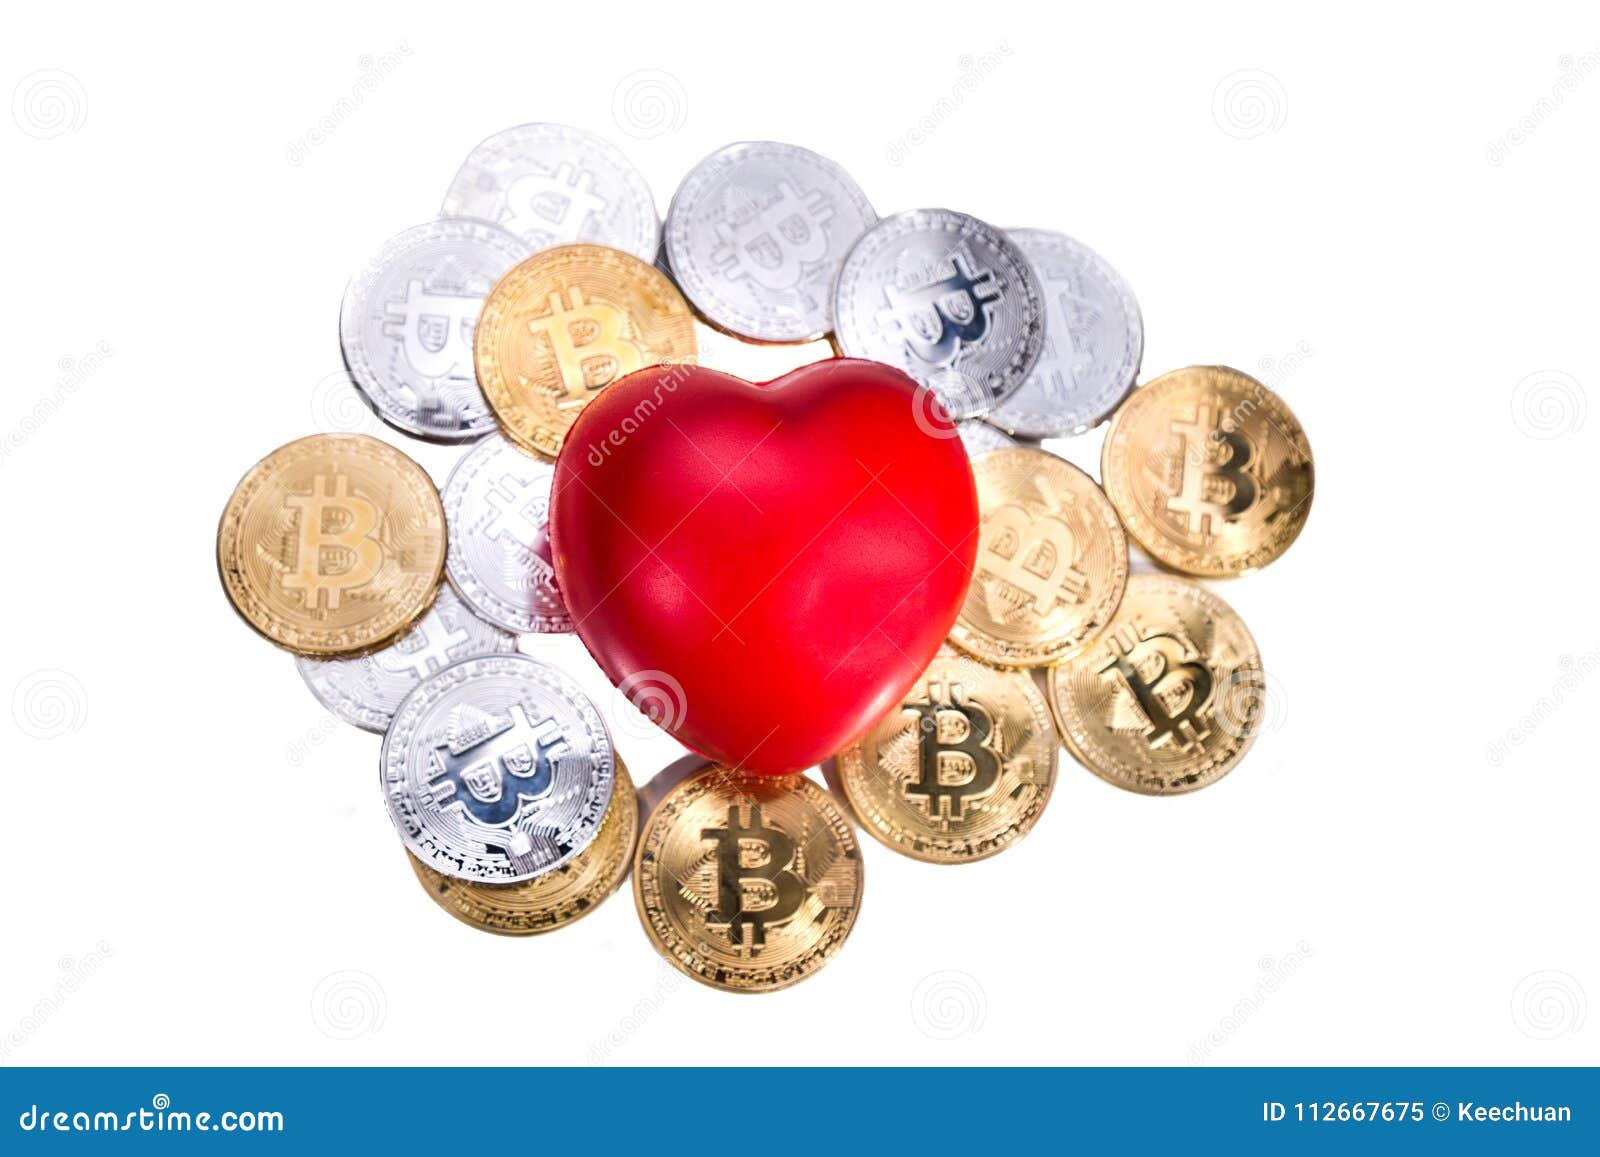 conceptual cryptocurrency bitcoin with red heart denoting love o